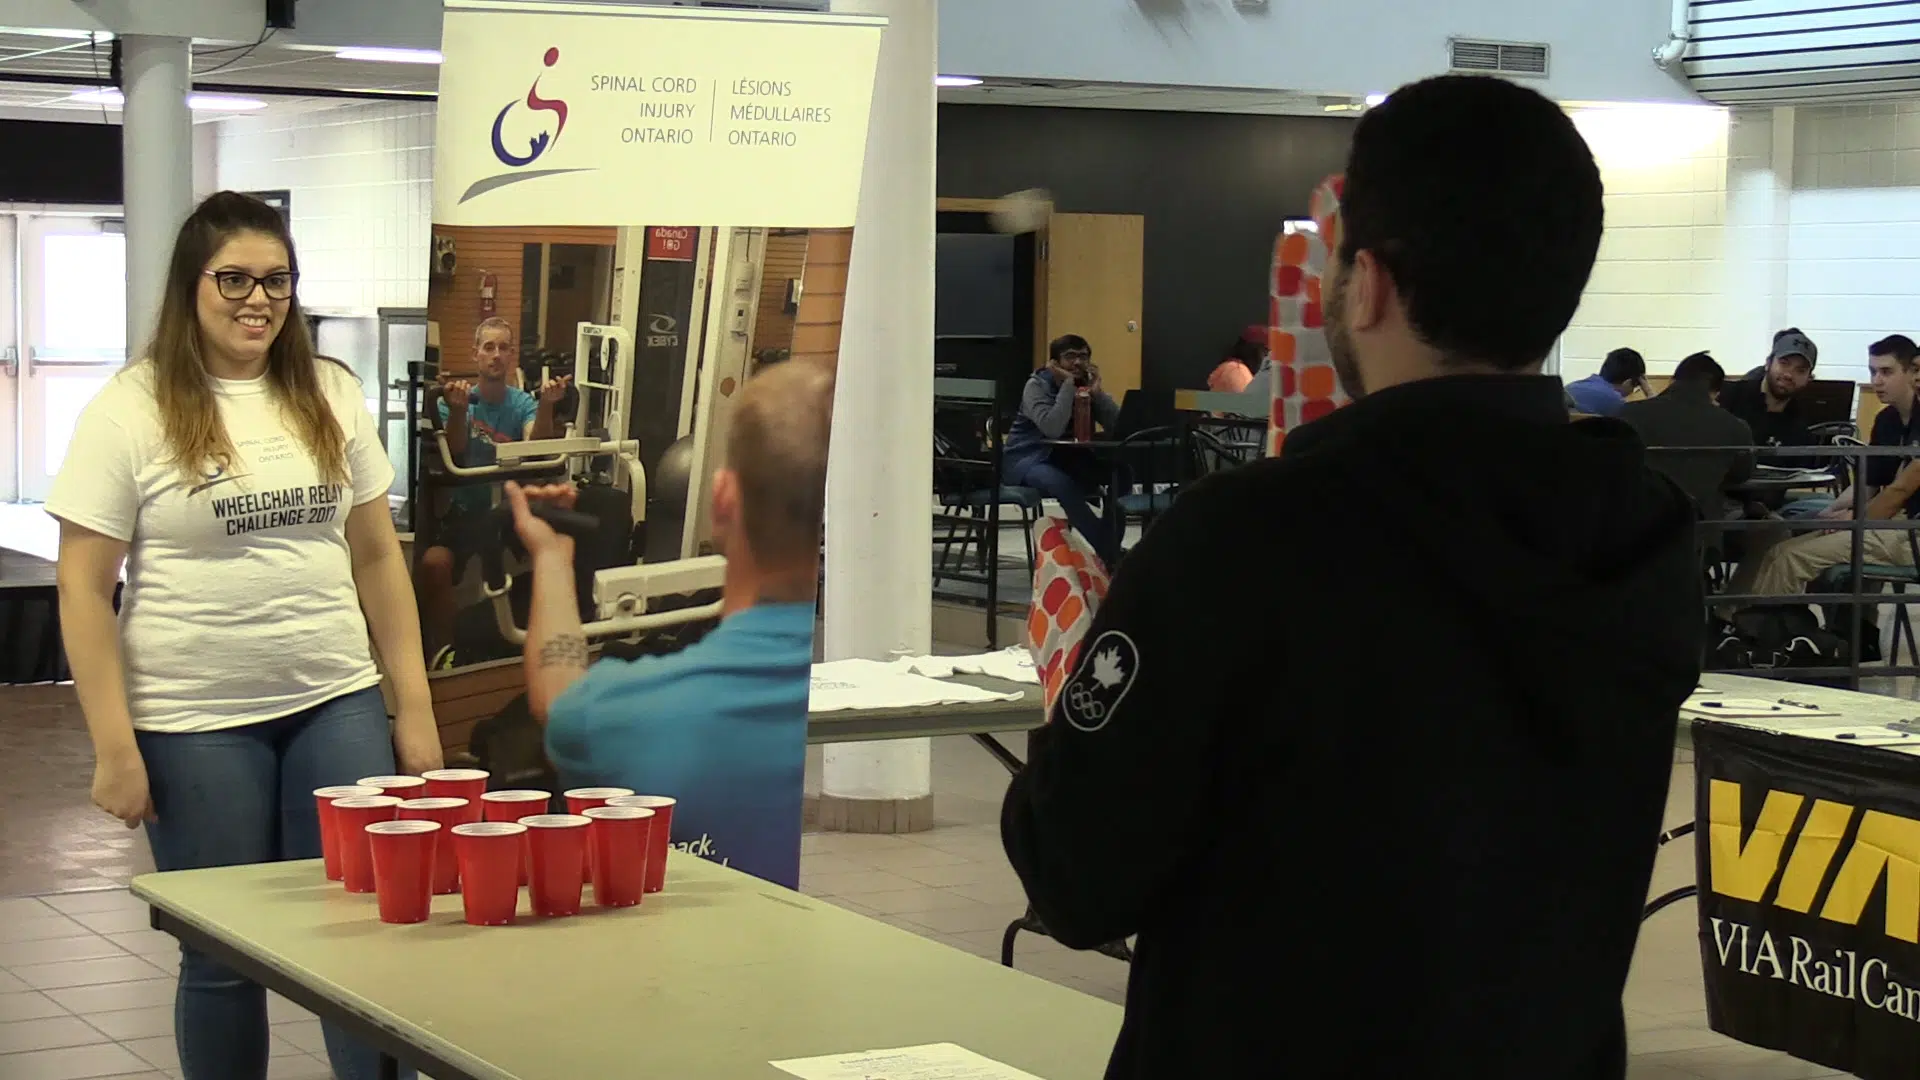 Cup pong raises awareness for spinal cord injuries